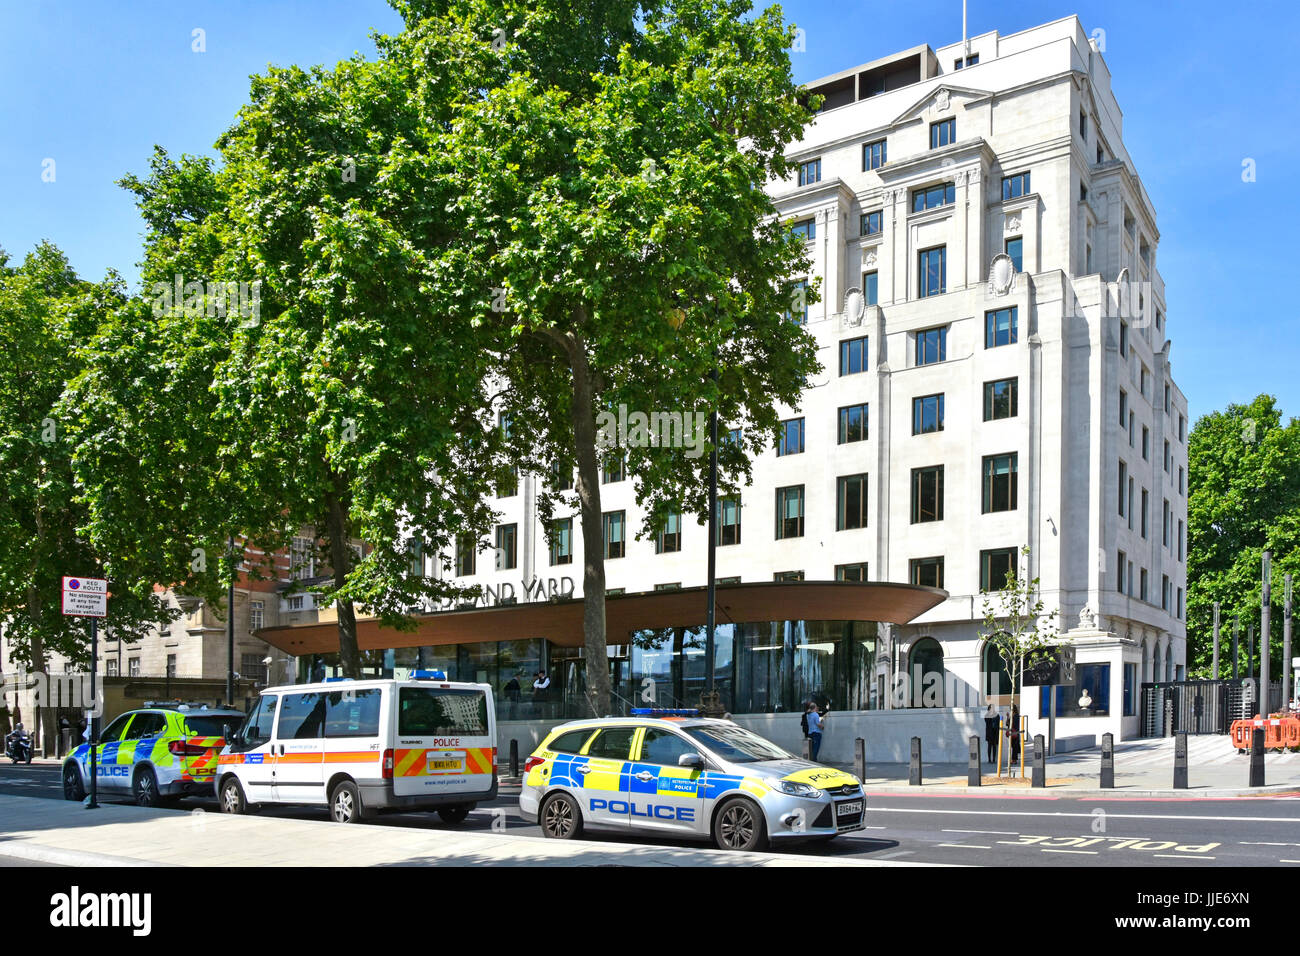 New Scotland Yard on Victoria Embankment refurbished 2015 2016 now current location & headquarters of the Metropolitan Police  with parked police cars Stock Photo